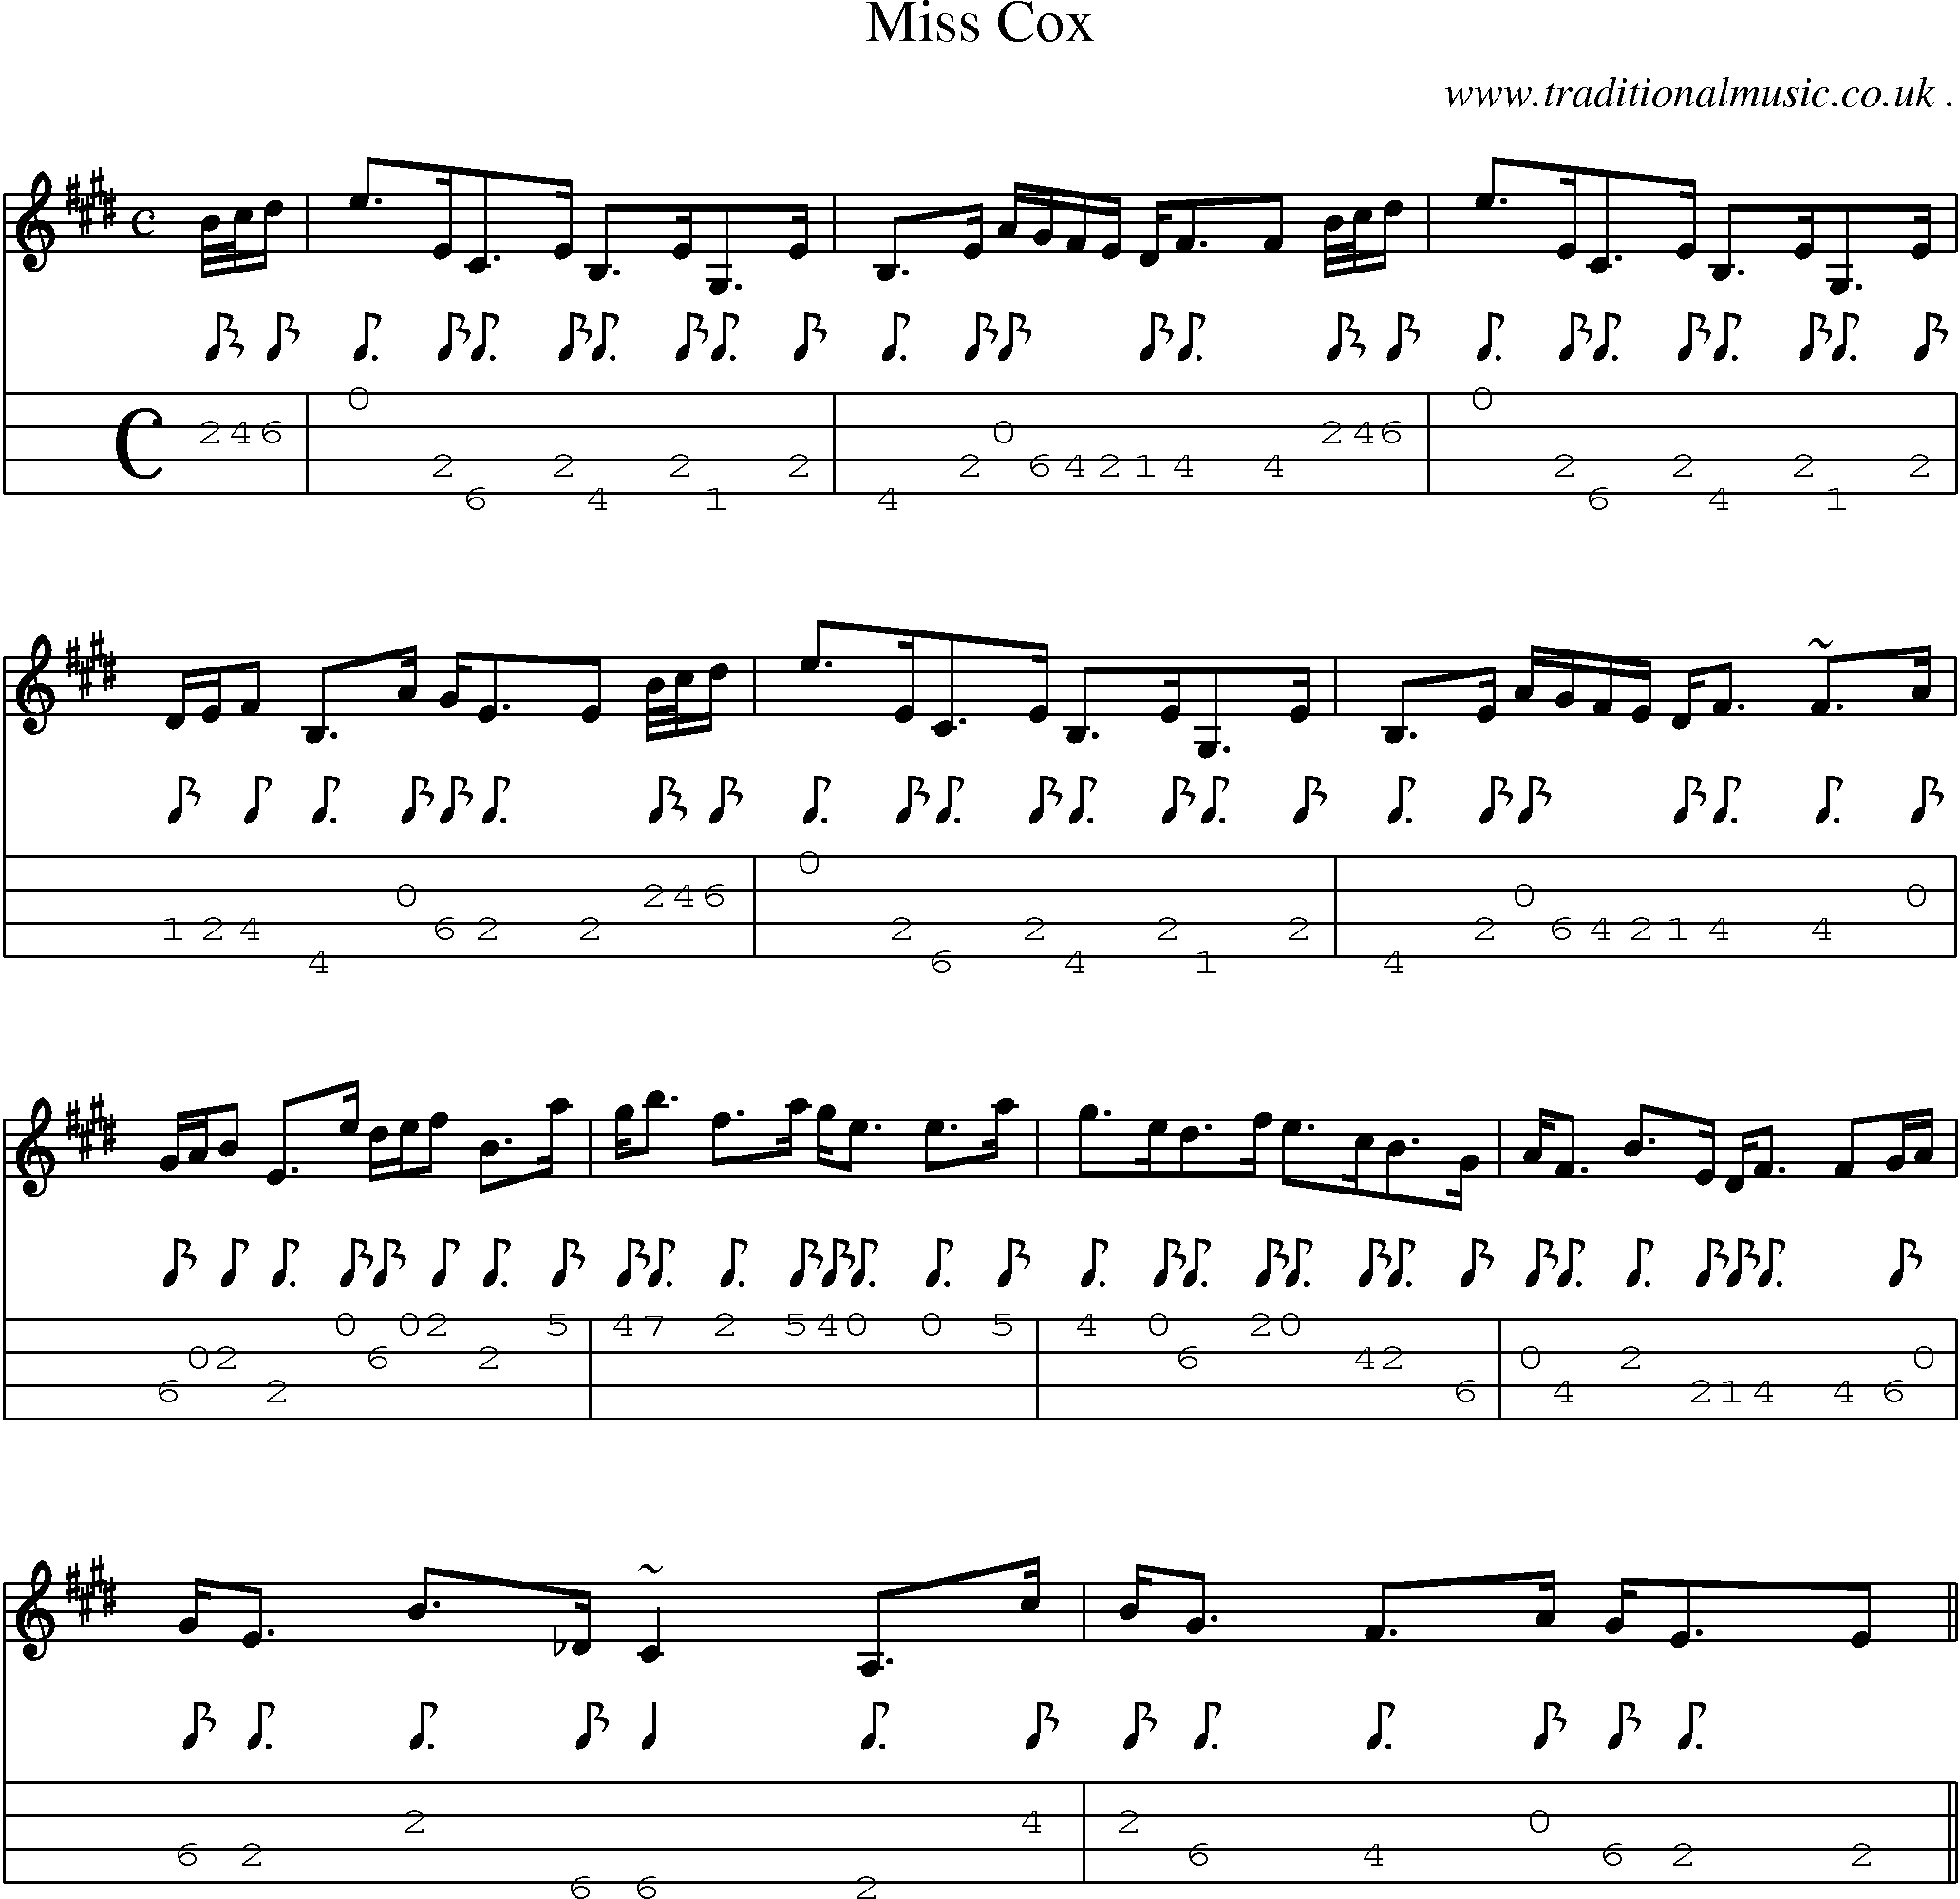 Sheet-music  score, Chords and Mandolin Tabs for Miss Cox